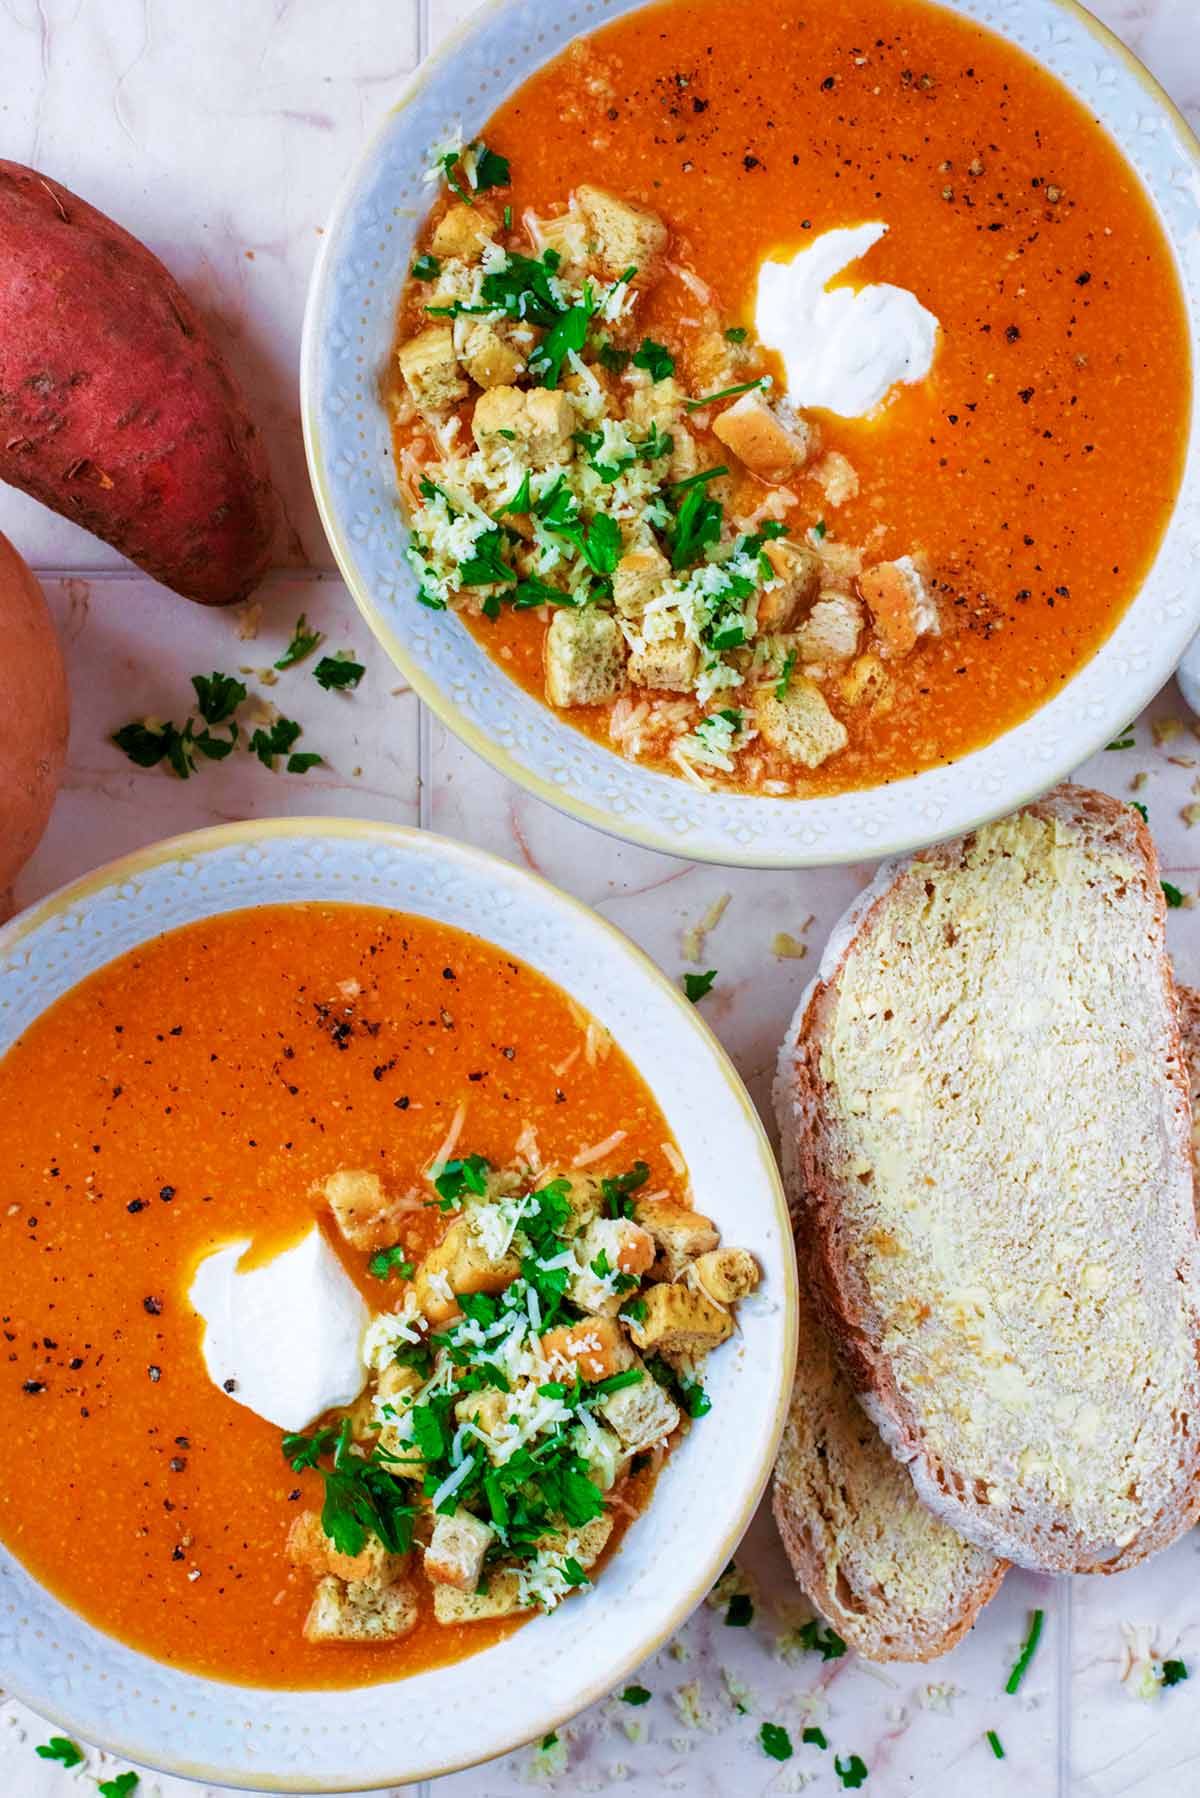 Two bowls of orange coloured soup next to some buttered bread.